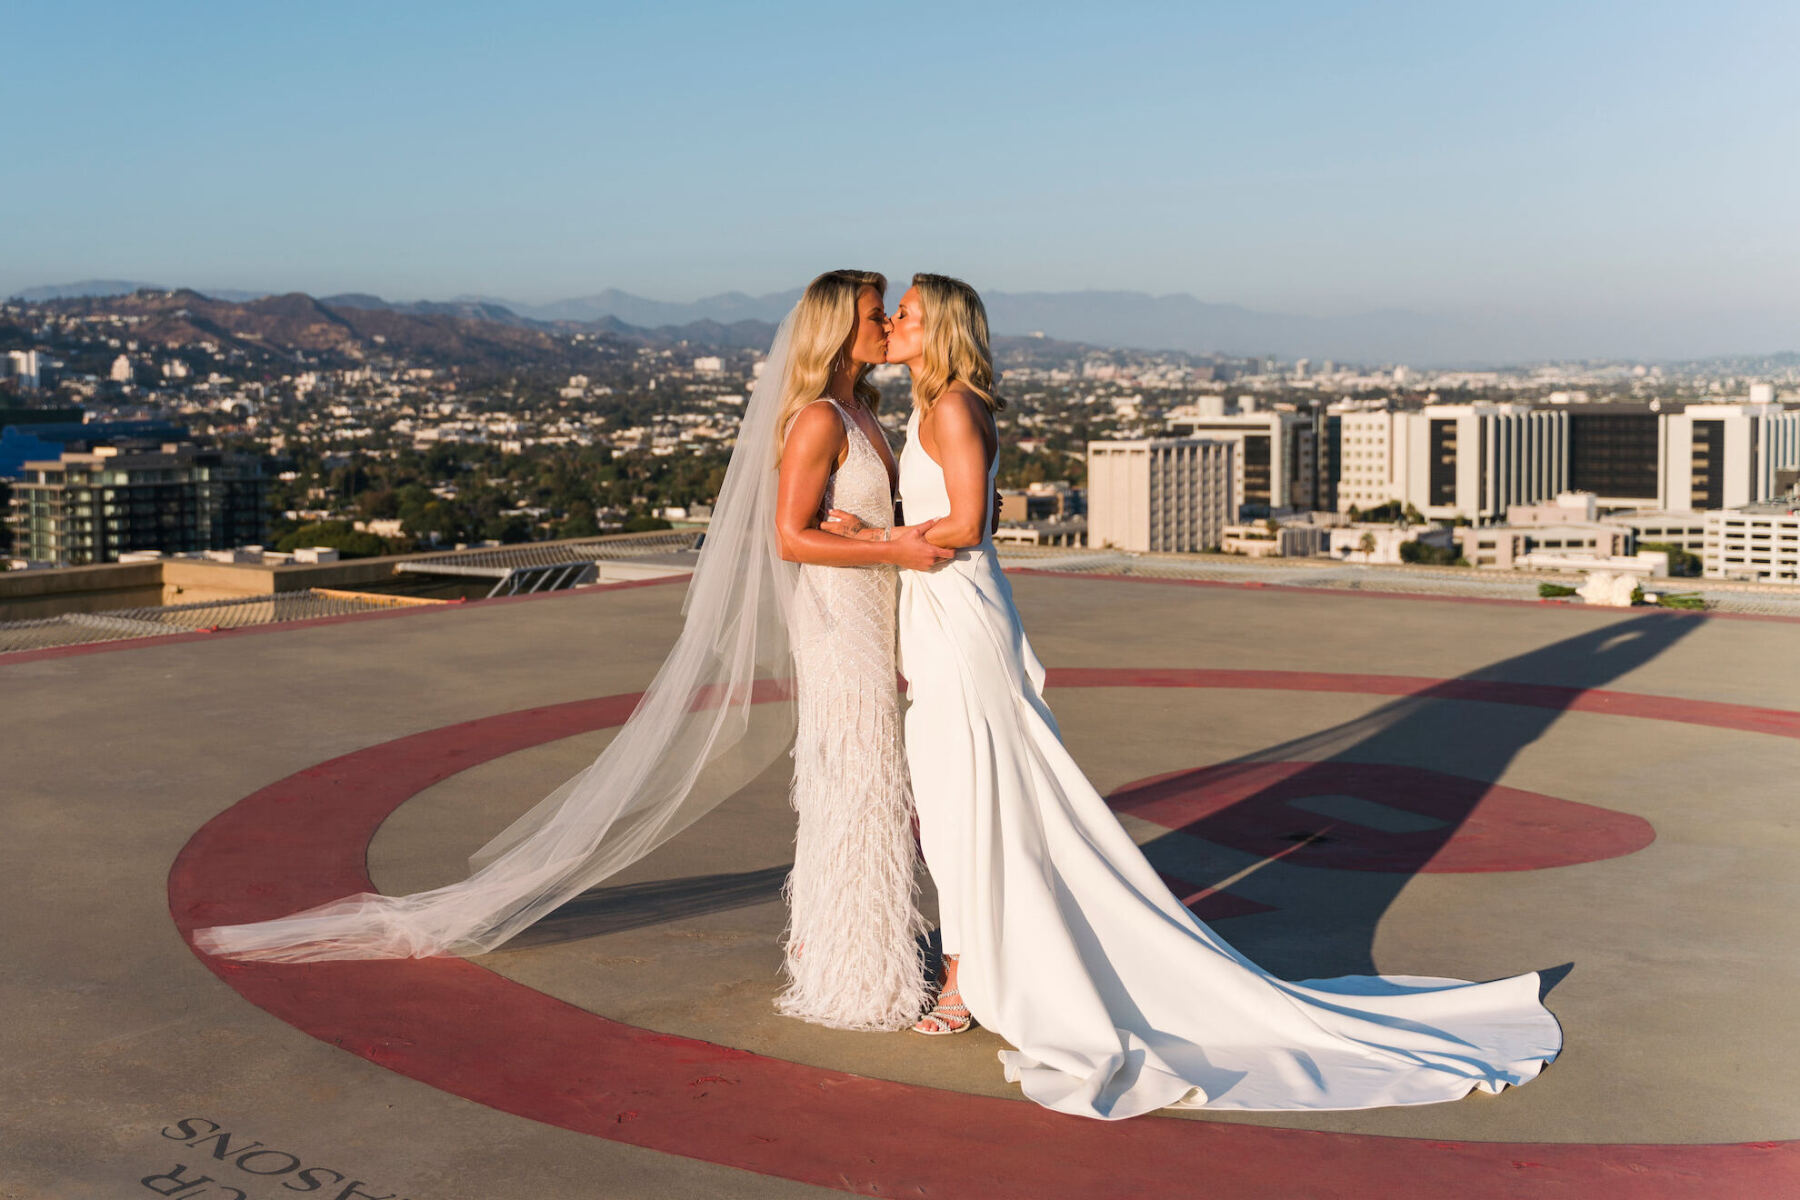 Following their ceremony, these brides took portraits on the helipad of their Los Angeles wedding venue.